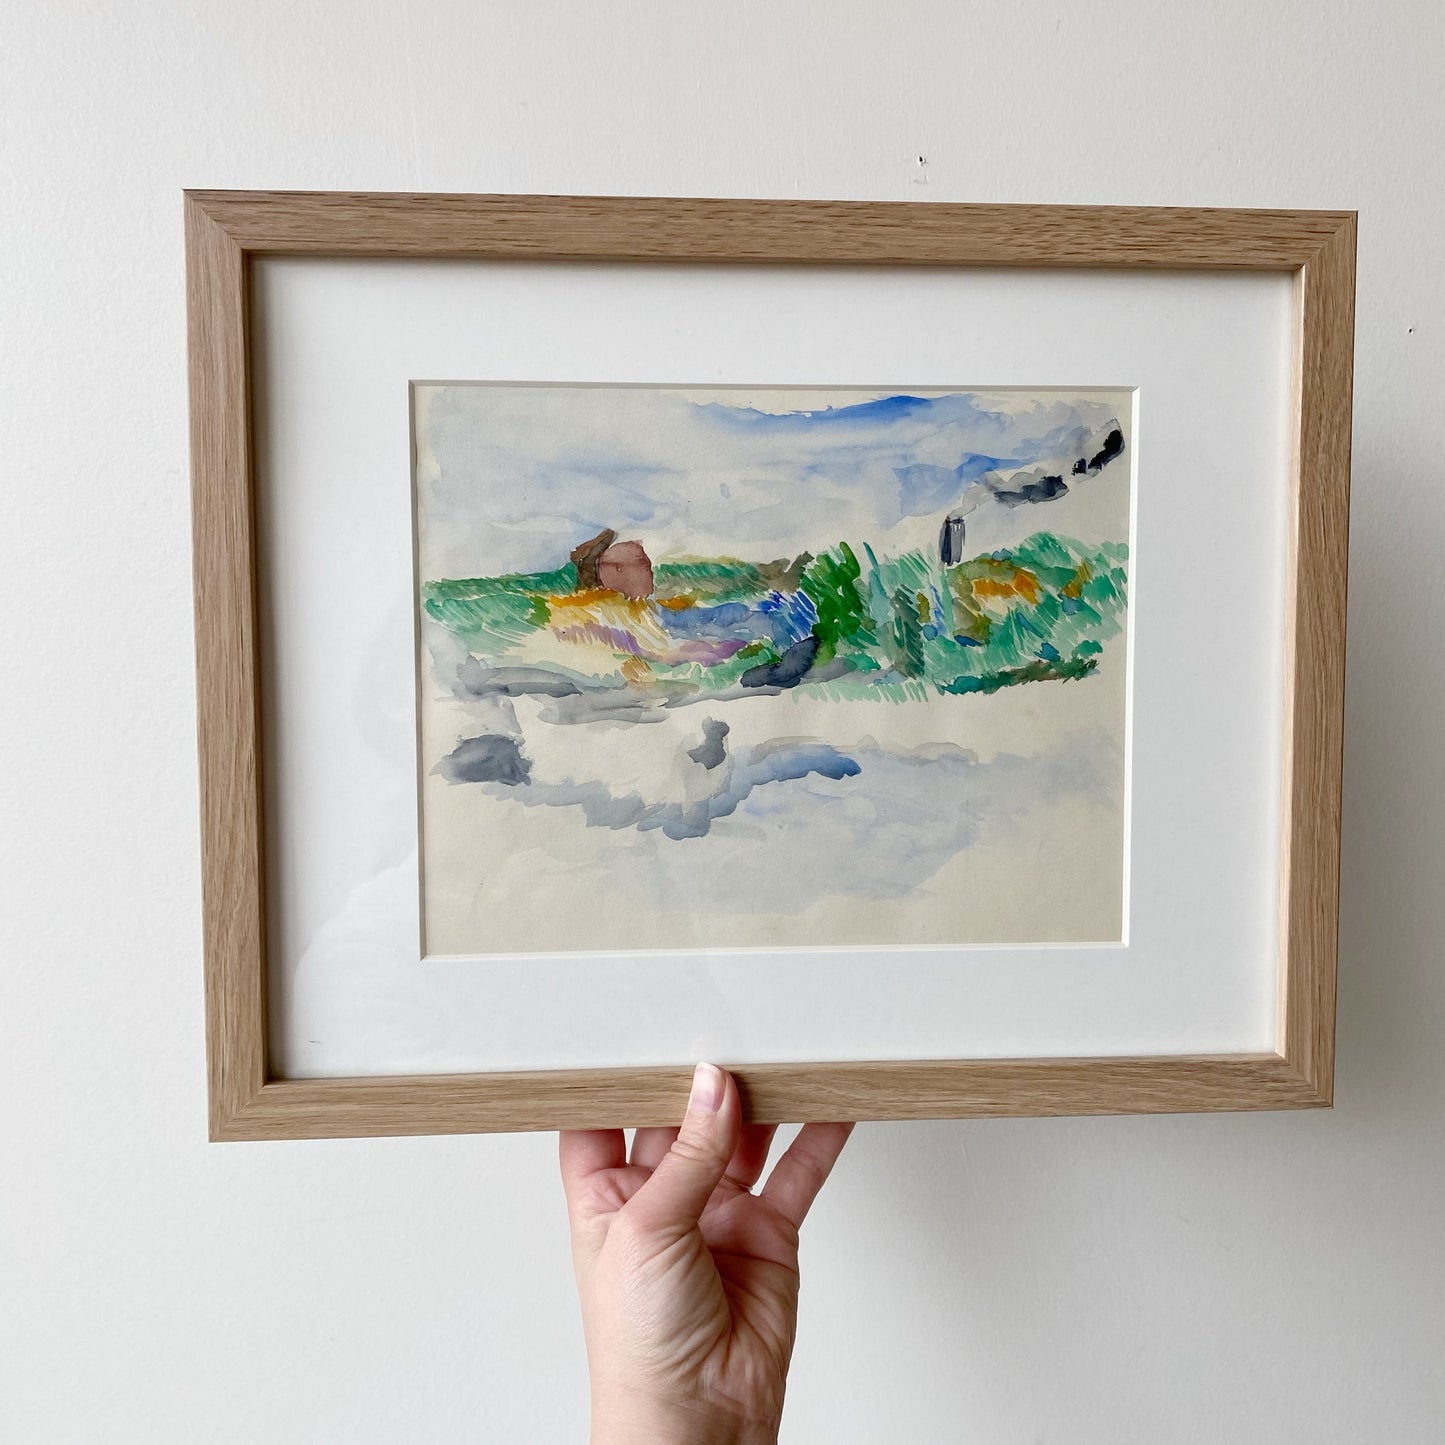 Vintage Original Watercolor Painting / Abstract Landscape